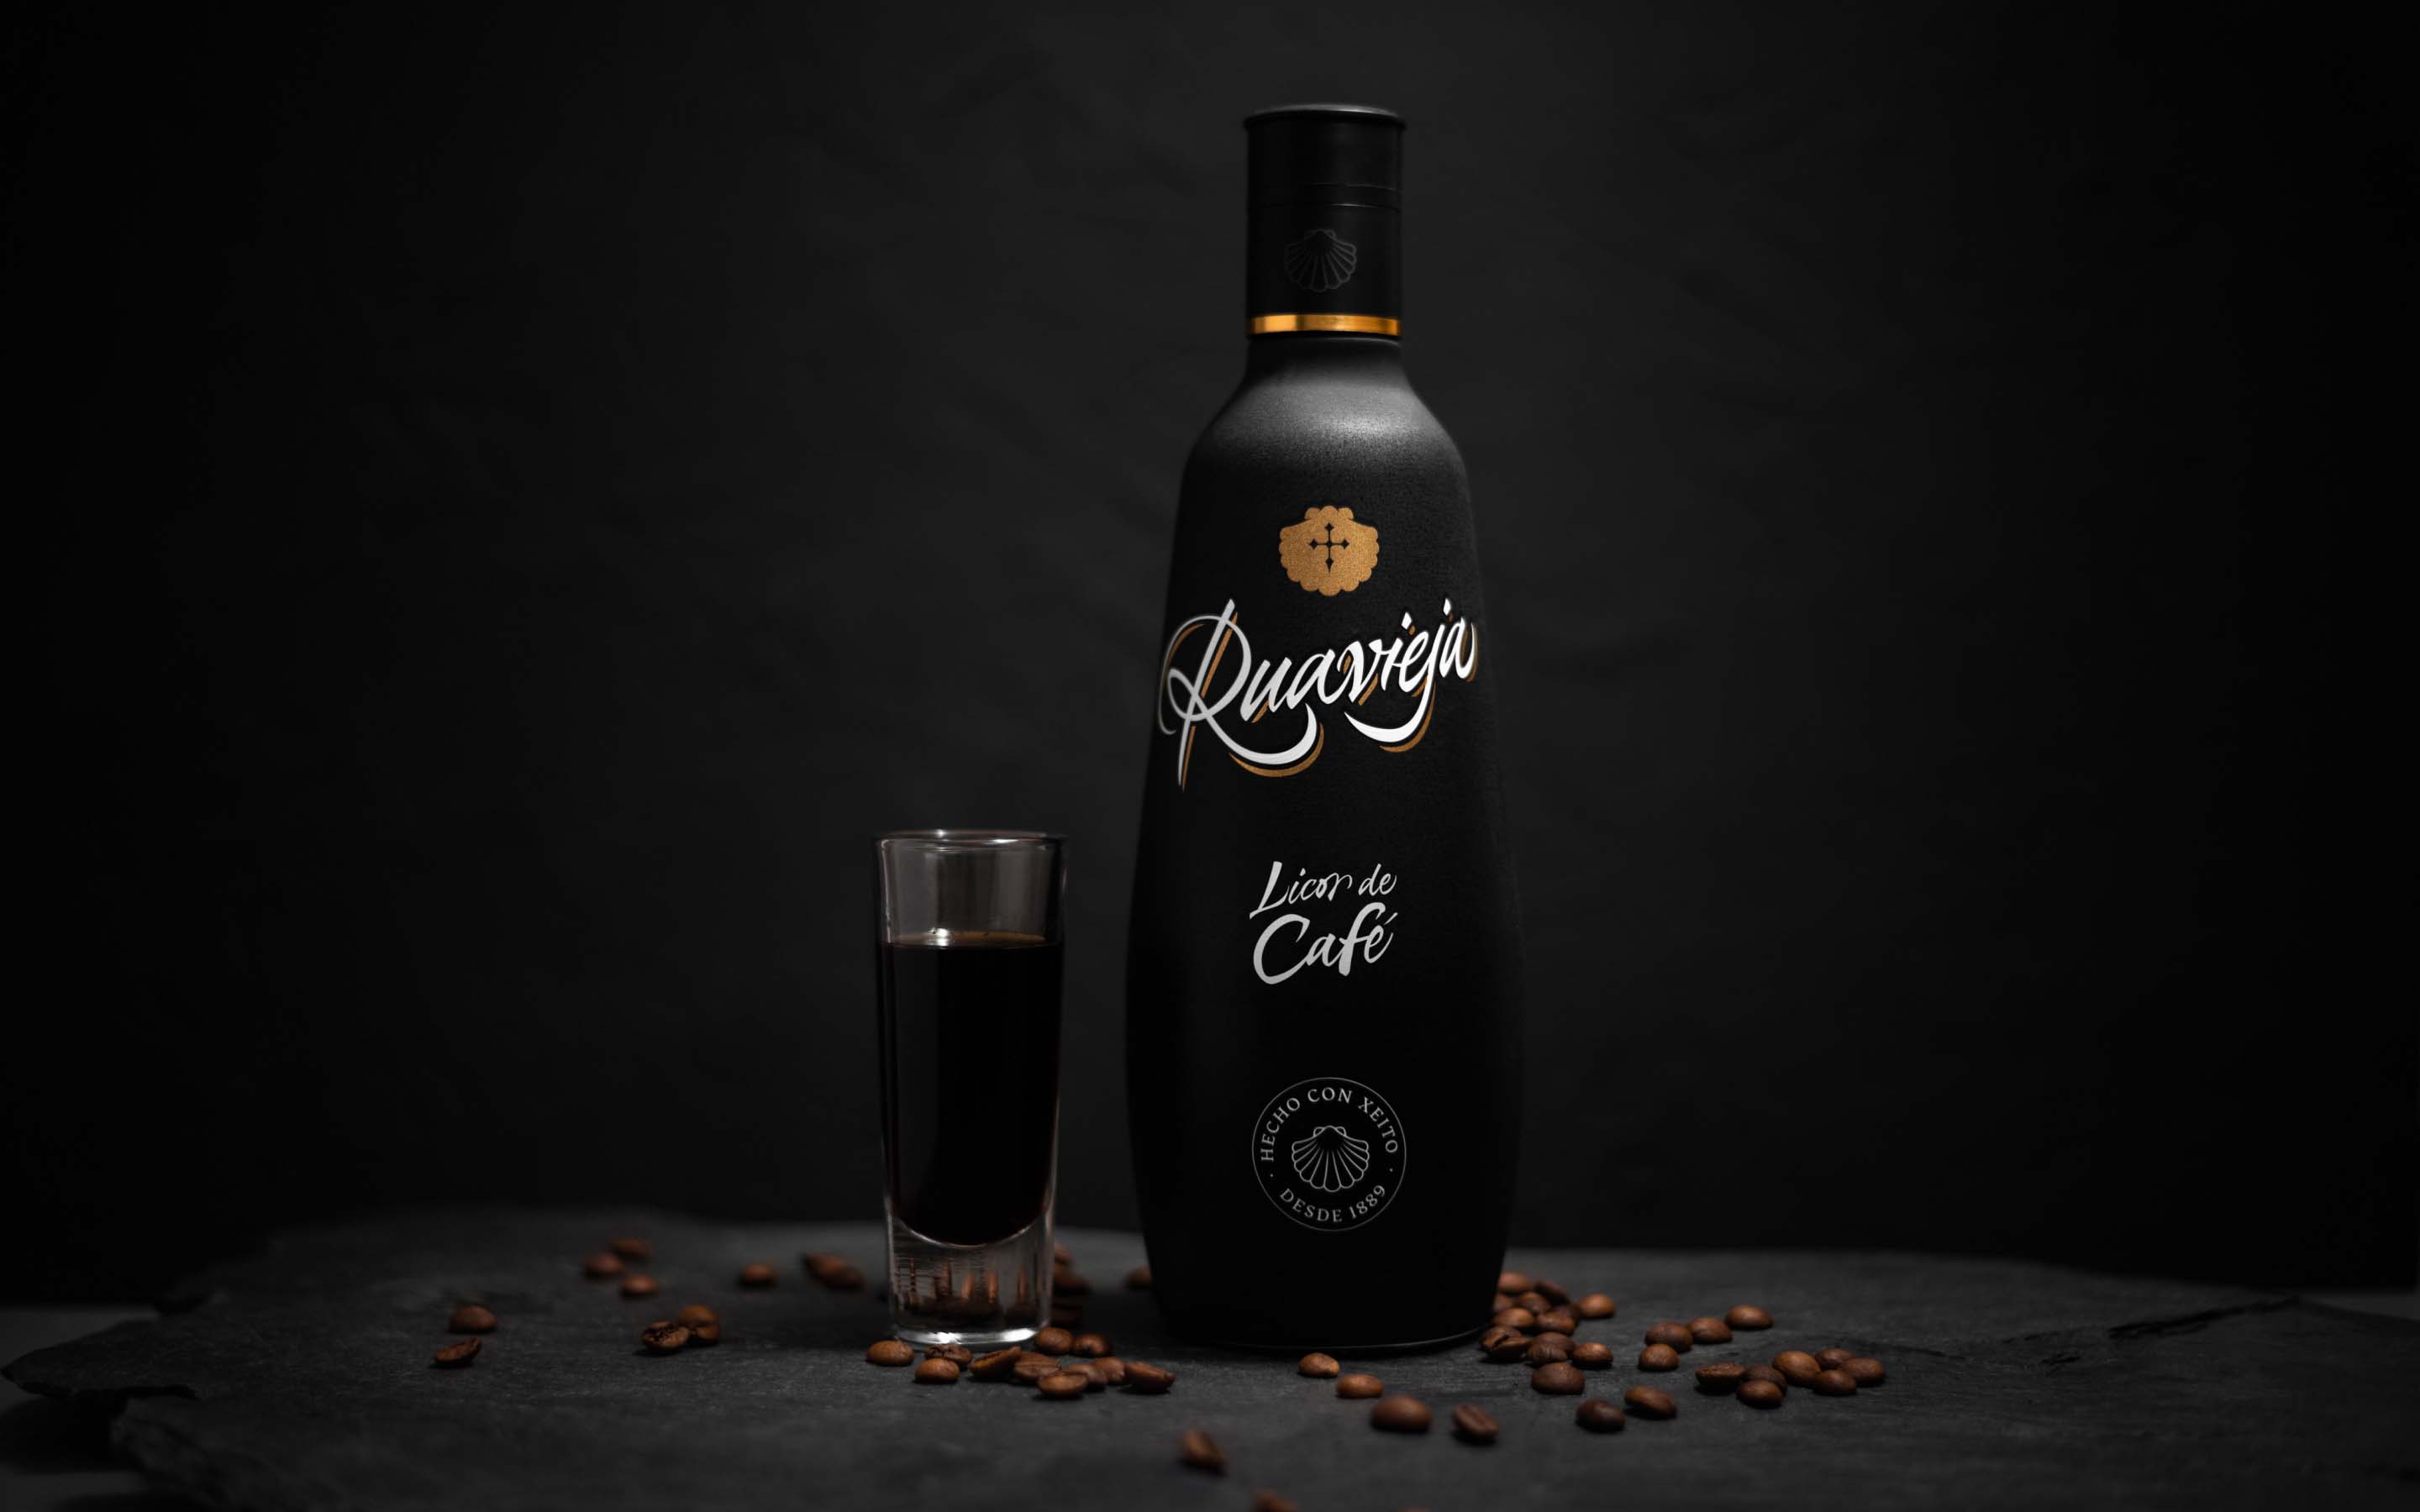 Ruavieja is a Spanish liqueur brand with more than 130 years of history that was born in Santiago de Compostela, Galicia. A company that has managed to stay alive in the minds and mouths of millions of Spaniards since 1889. 
